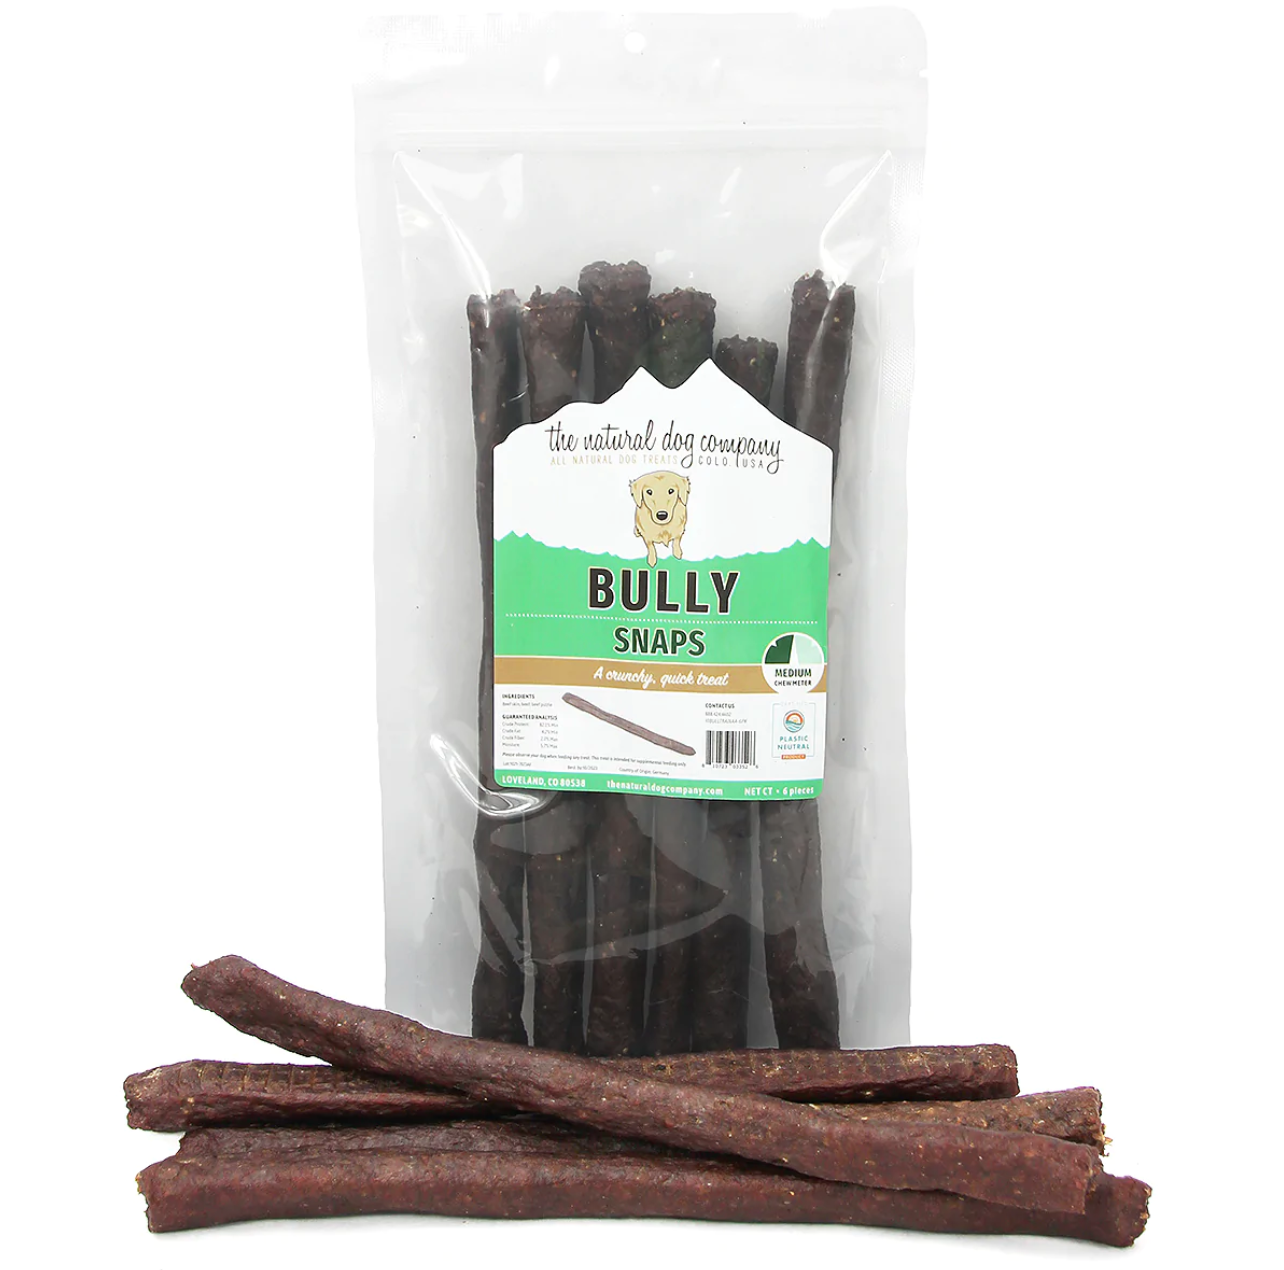 Tuesday's Natural Dog Company "Bully Snaps" Collagen Chew 10" - 6 pack